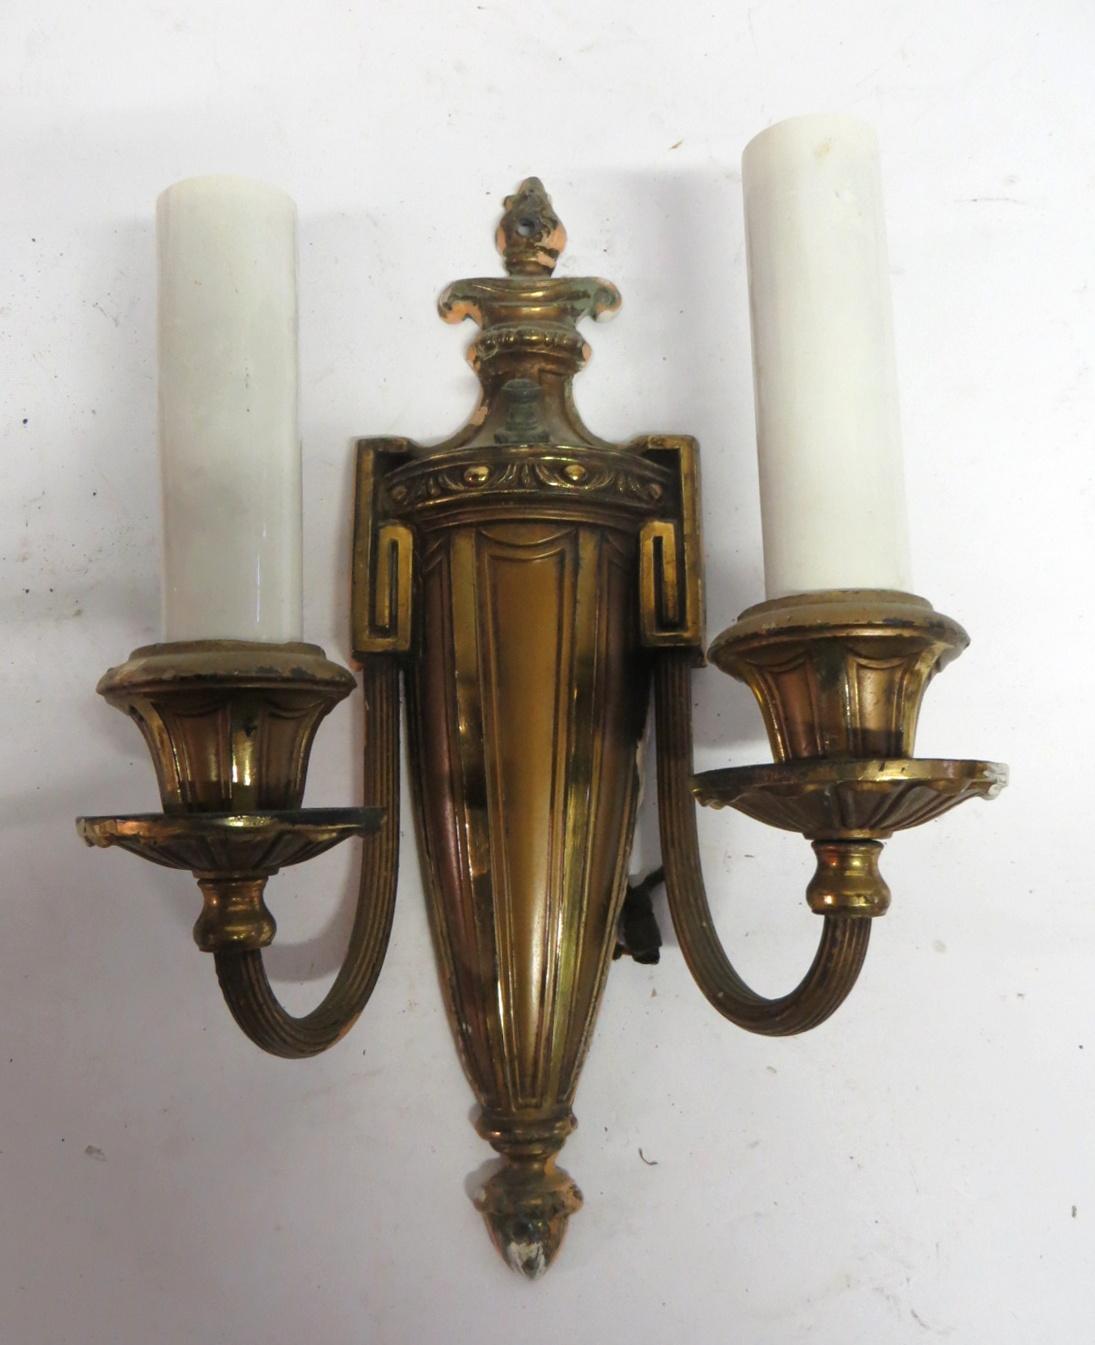 Vintage neoclassical style two-arm brass scones with a flame and acorn finial motif and Greek key shoulder design, circa 1920. Price includes cleaning, repair and wiring. Please allow 1-2 weeks for processing. Priced as a set. These can be seen at